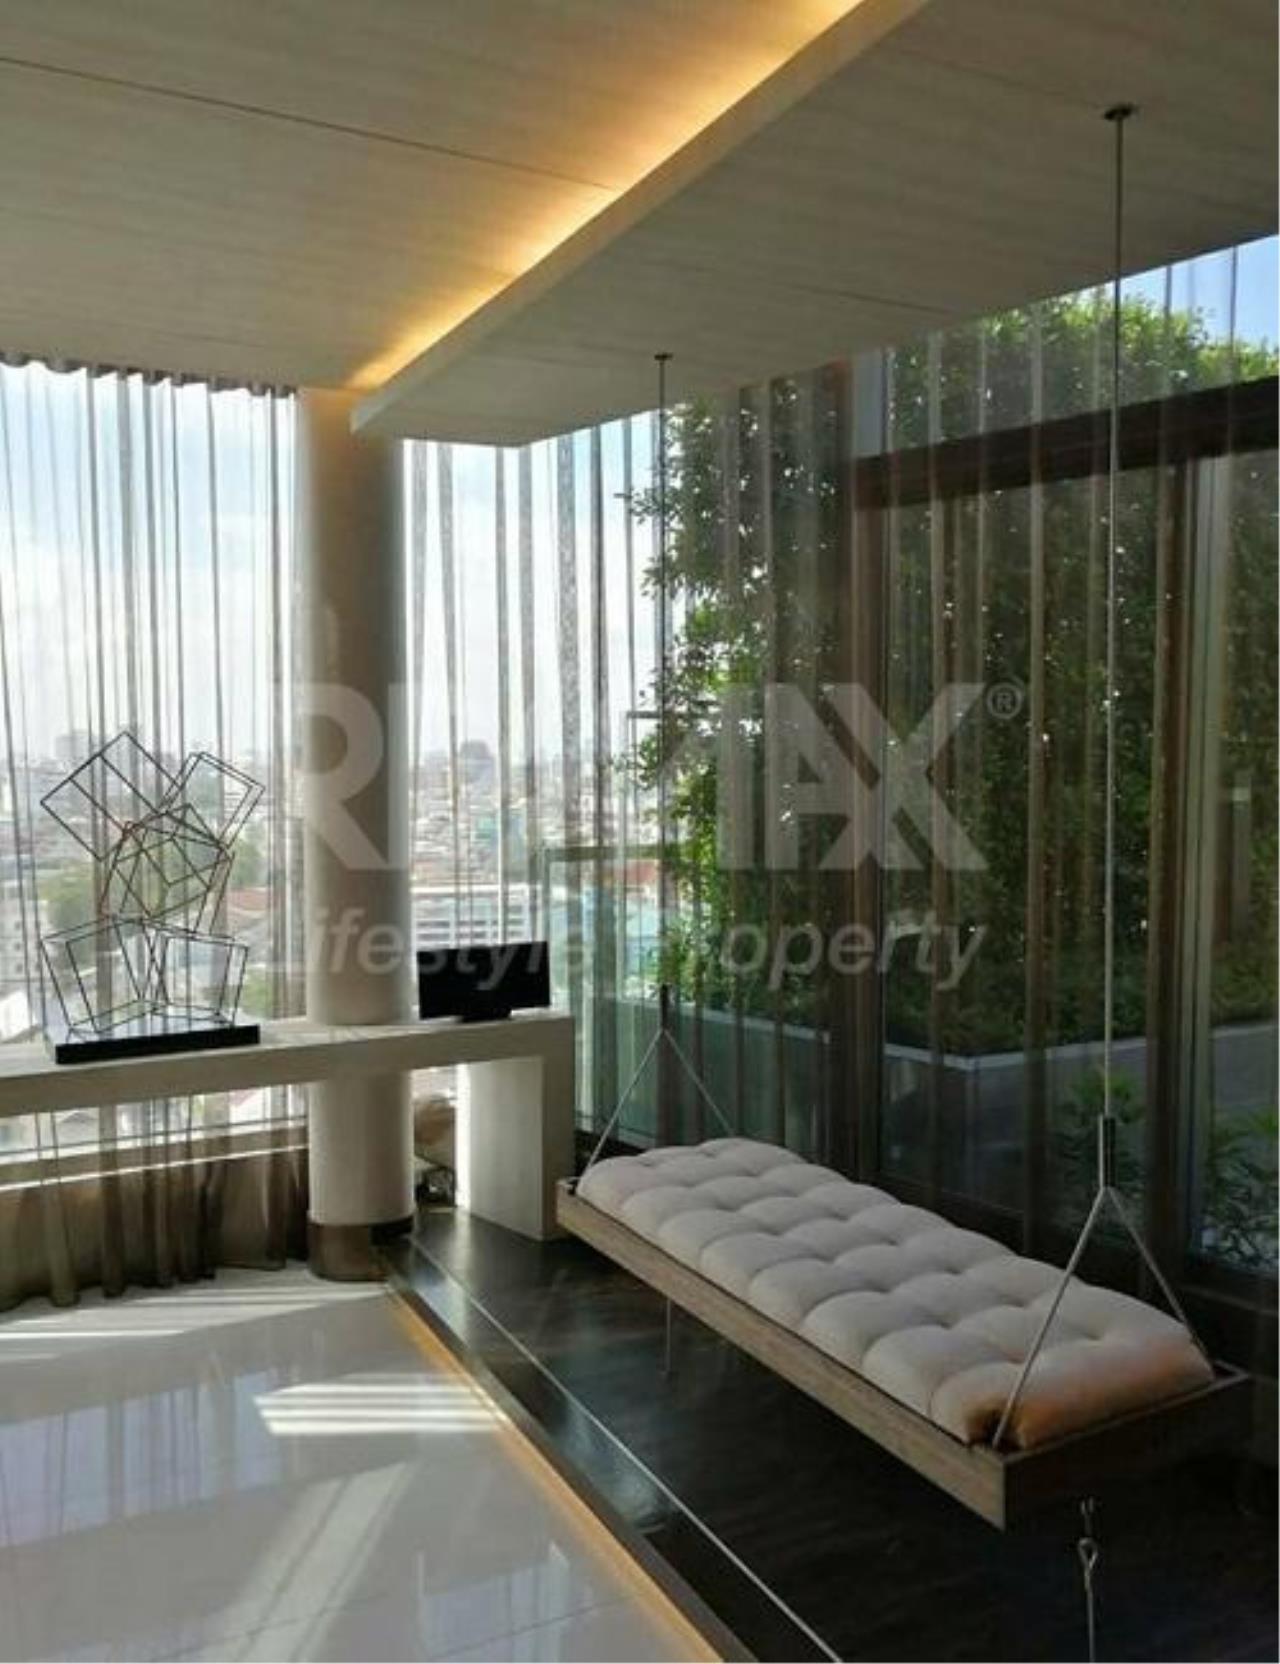 RE/MAX LifeStyle Property Agency's The Room Charoenkrung 30 9